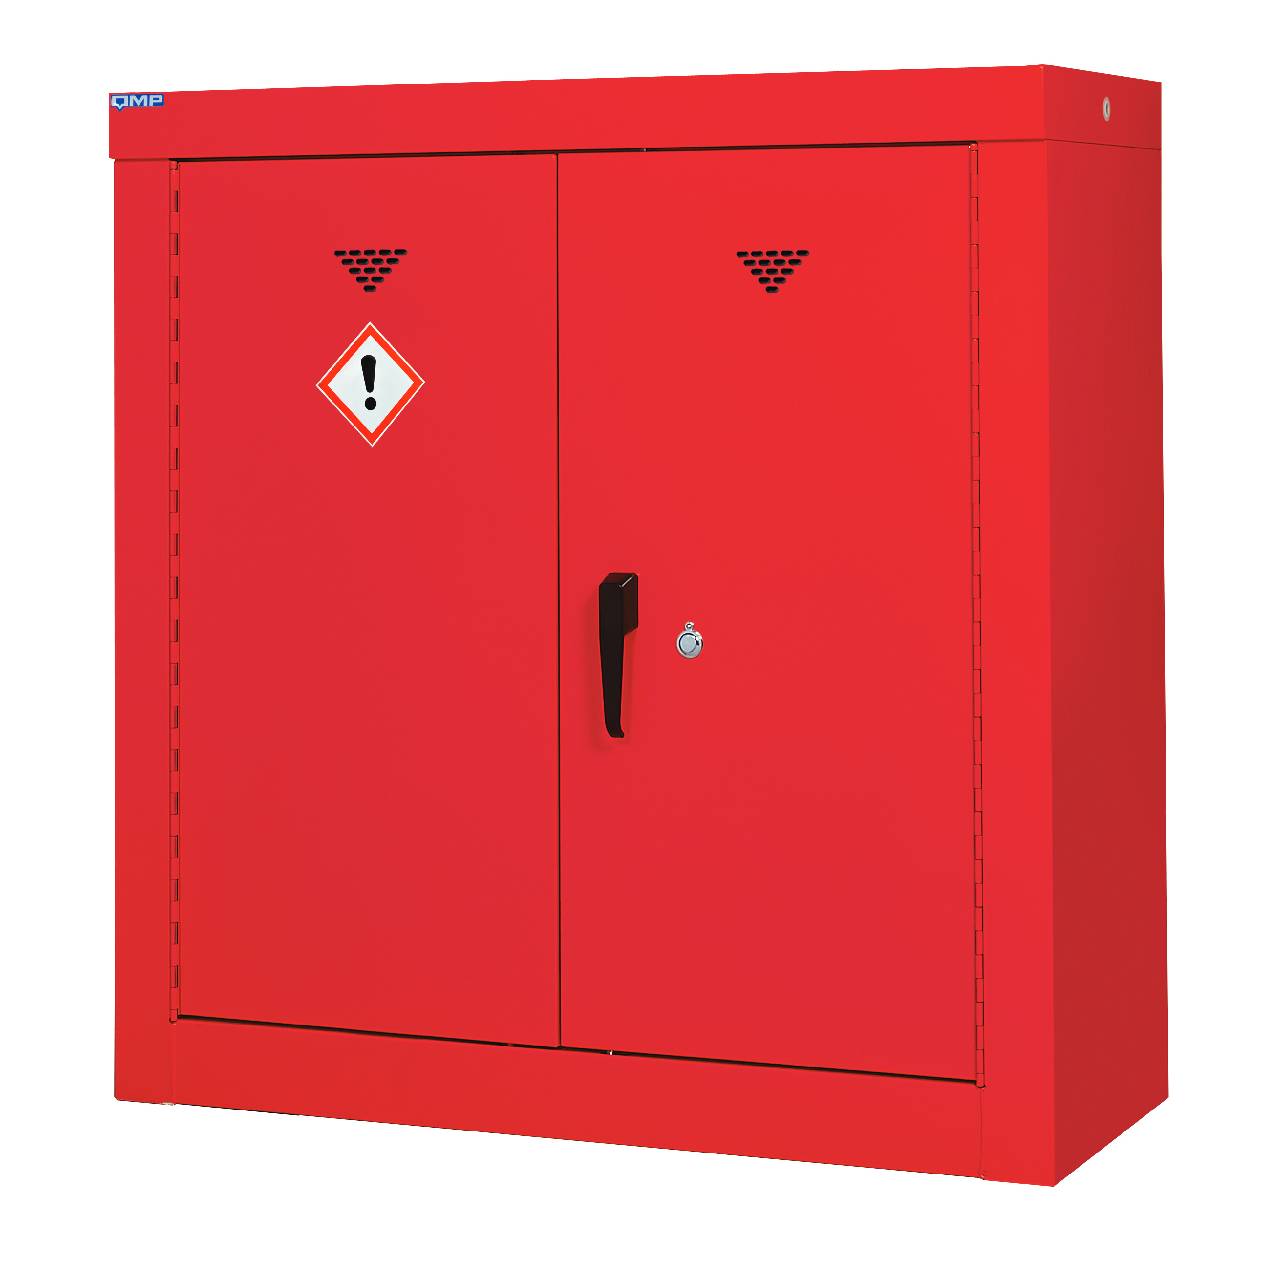 QMP Pesticide & Agrochemical Floor Standing Security Cabinets - 1200H x 1200W x 460D mm